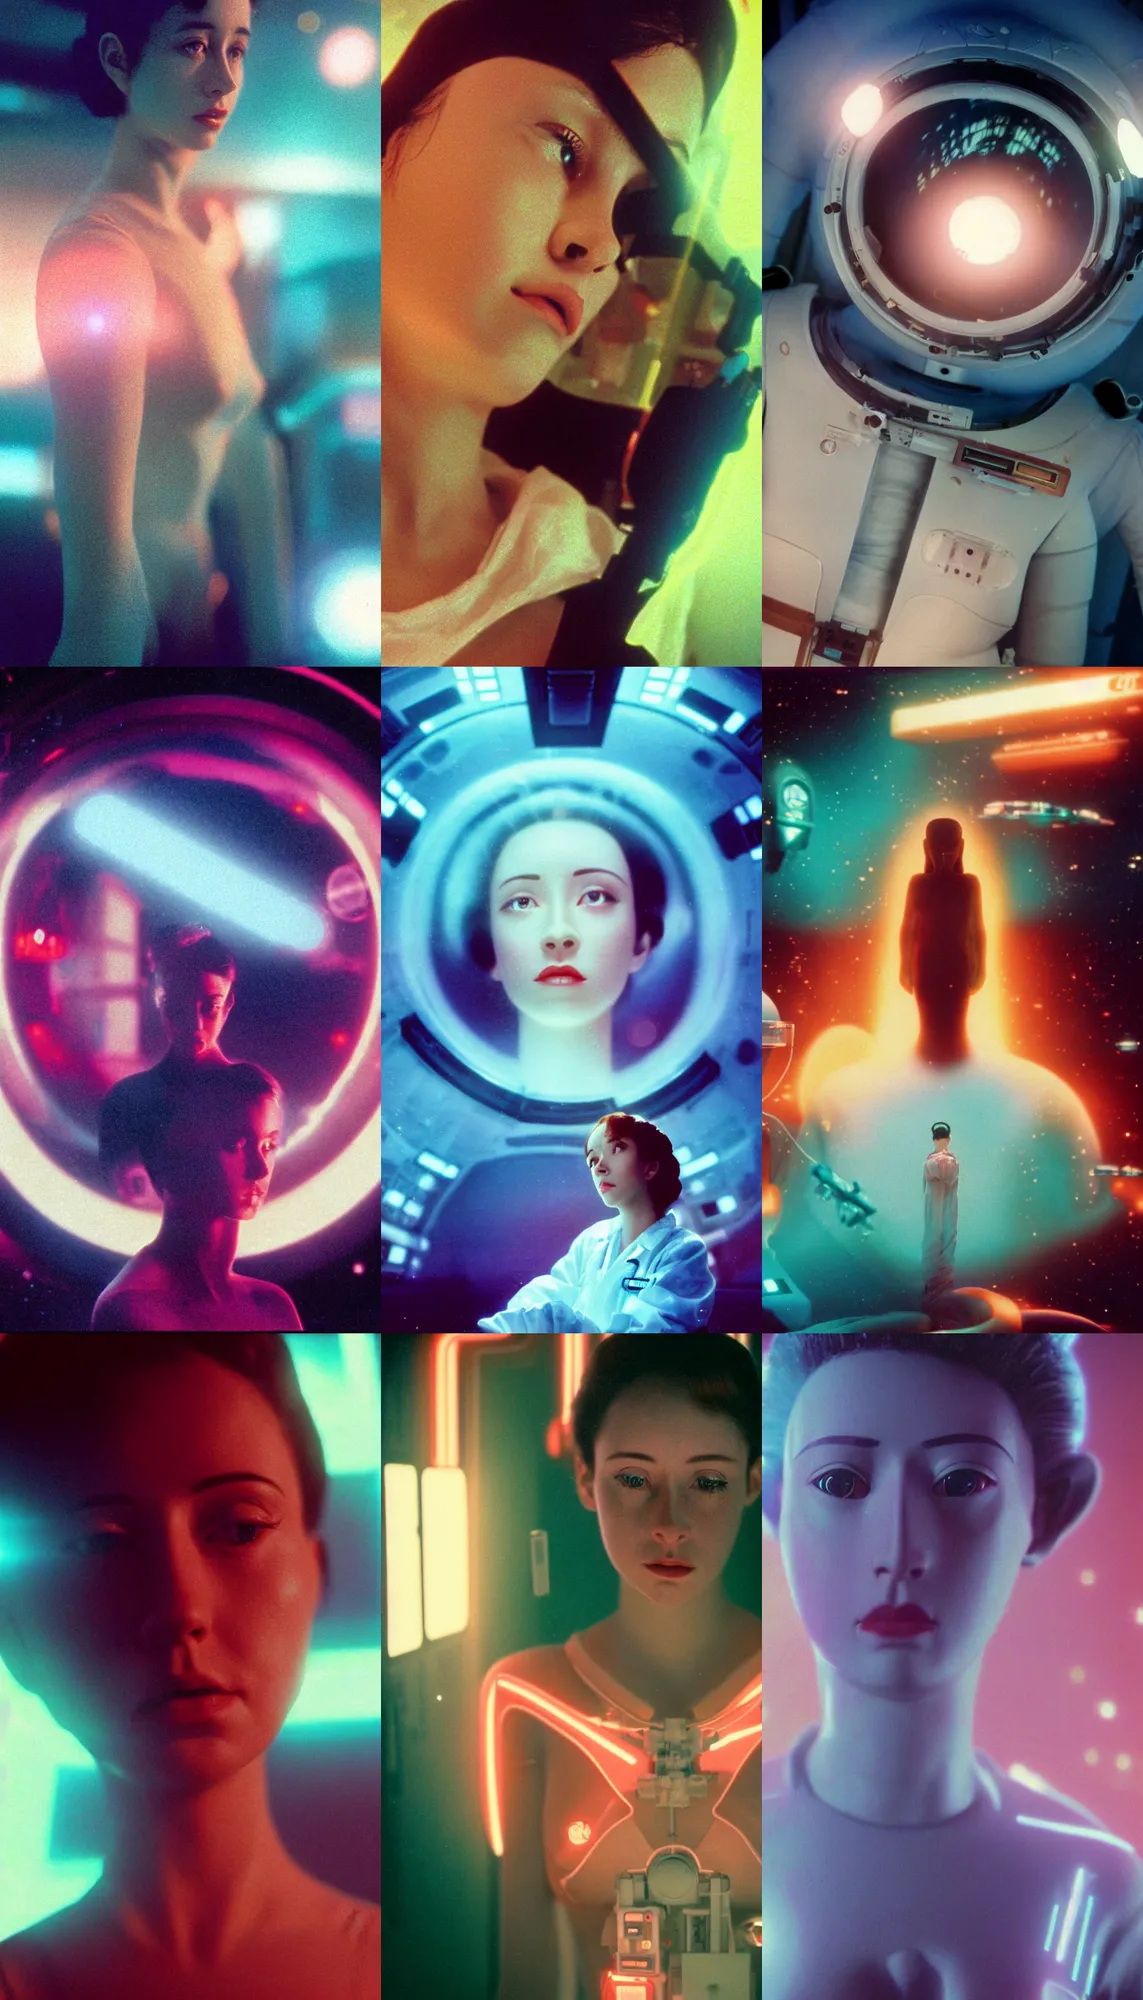 Prompt: Cinestill 50d, 8K, 35mm,J.J Abrams flare; beautiful ultra realistic vaporwave minimalistic avalokiteshvara pilot in space(1950) film still medical lab scene, 2000s frontiers in blade runner retrofuturism fashion magazine September hyperrealism holly herndon edition, highly detailed, extreme closeup three-quarter model portrait, tilt shift background, three point perspective: focus on anti-g flight suit;pointé pose;open mouth,terrified, eye contact, soft lighting